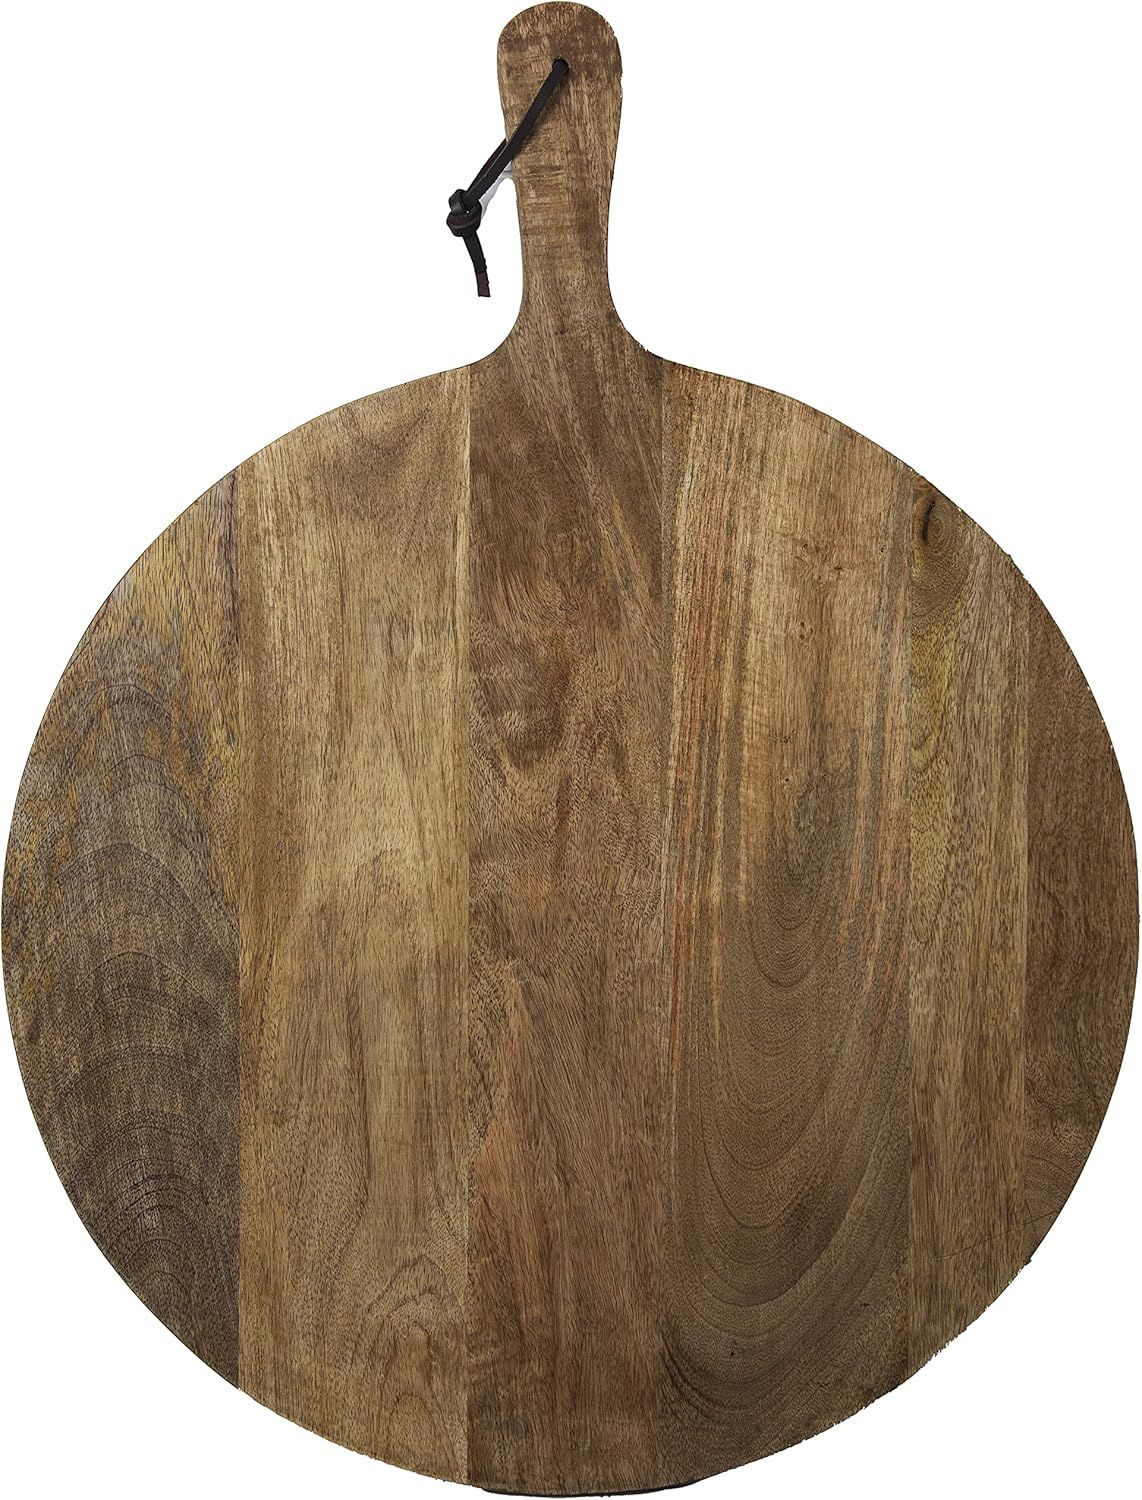 Heritage Lace Artisan Wood 20" Serving Charcuterie Board, Natural (FH-041) | Amazon (US)